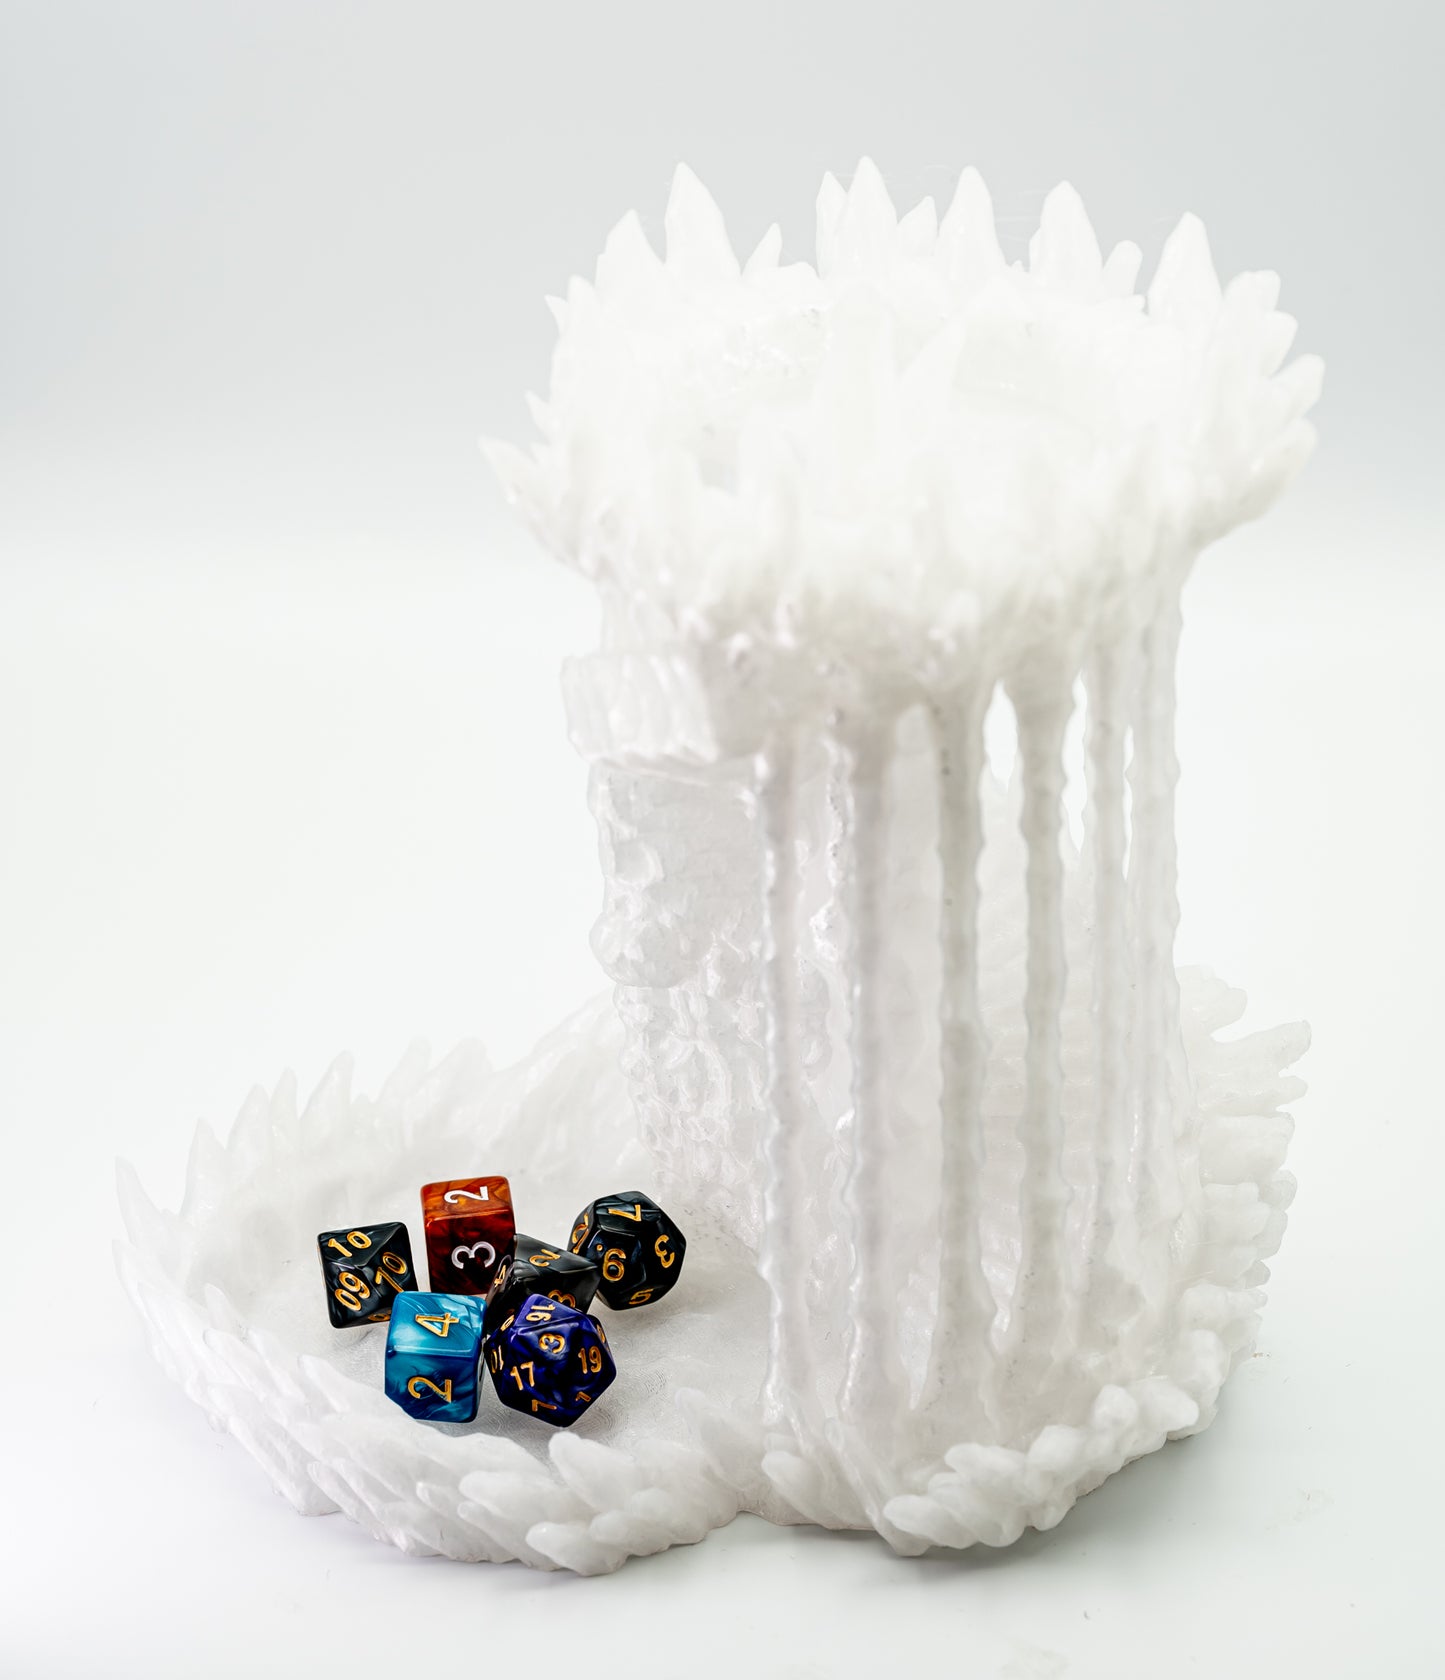 Crystal Tower-3D Printed Dice Tower/Roller